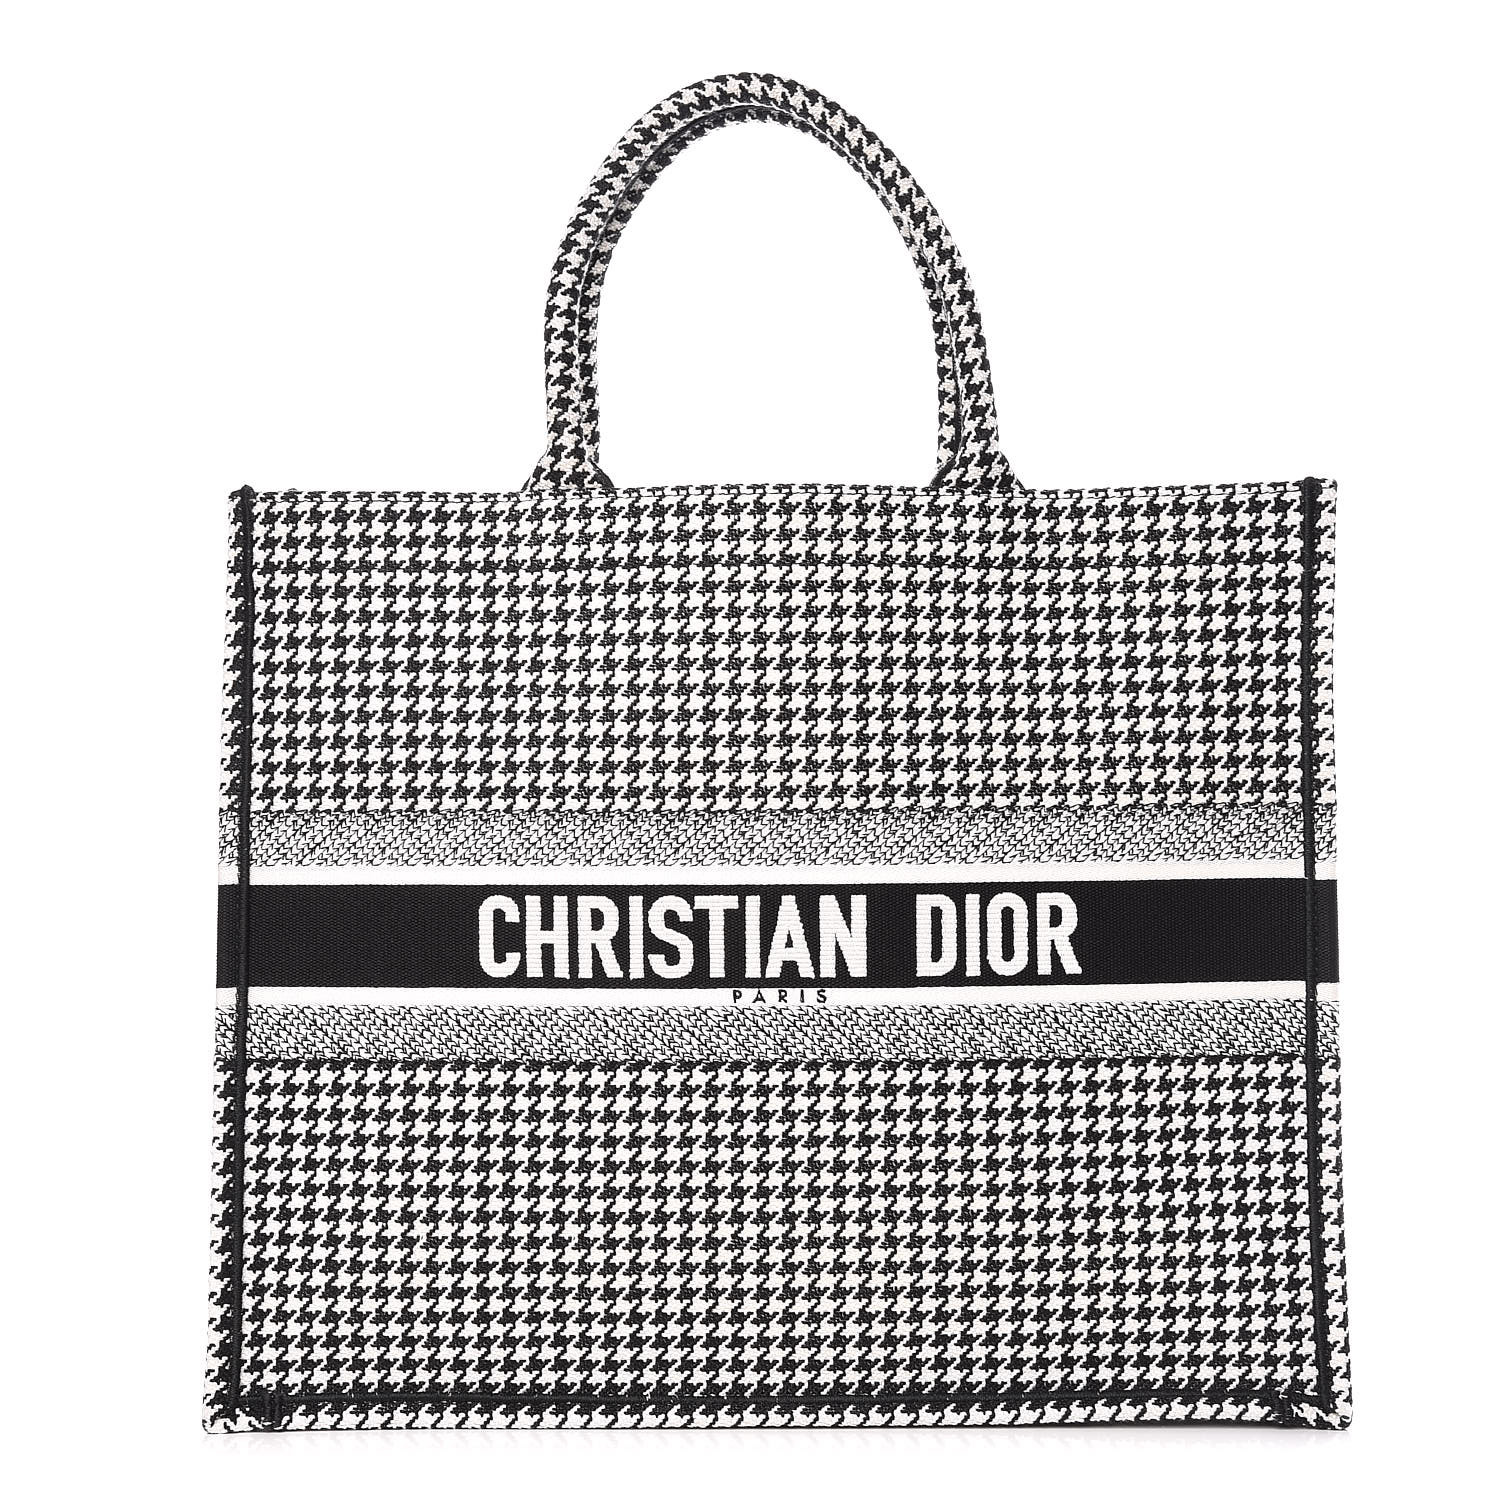 CHRISTIAN DIOR Embroidered Canvas Houndstooth Book Tote Black White 397997